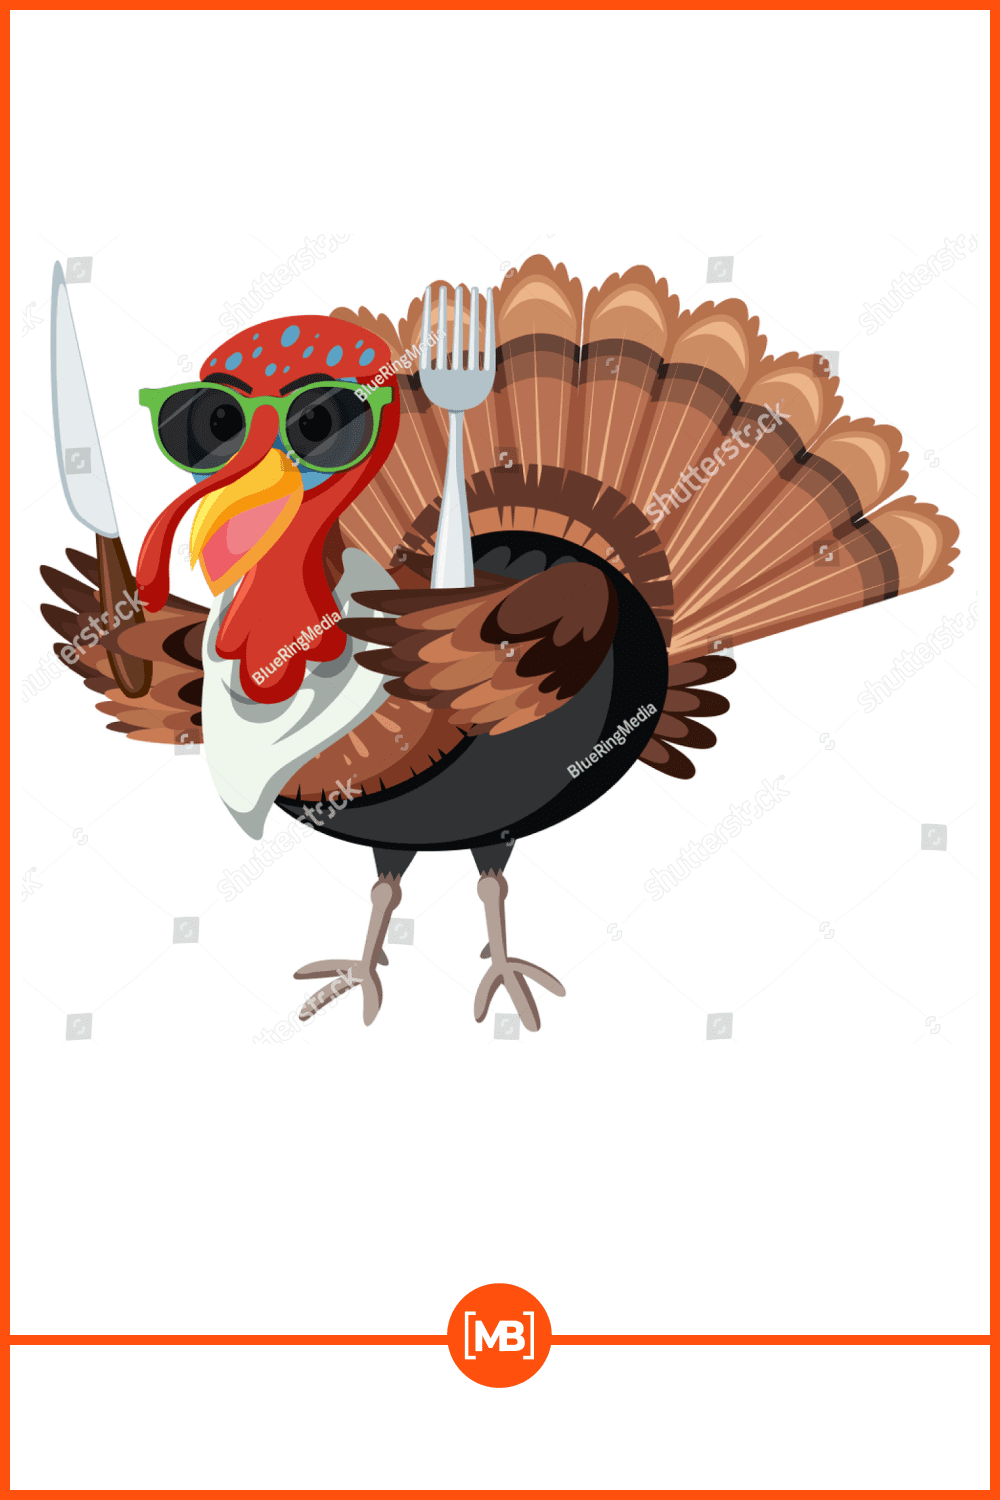 A Turkey character on white background illustration.